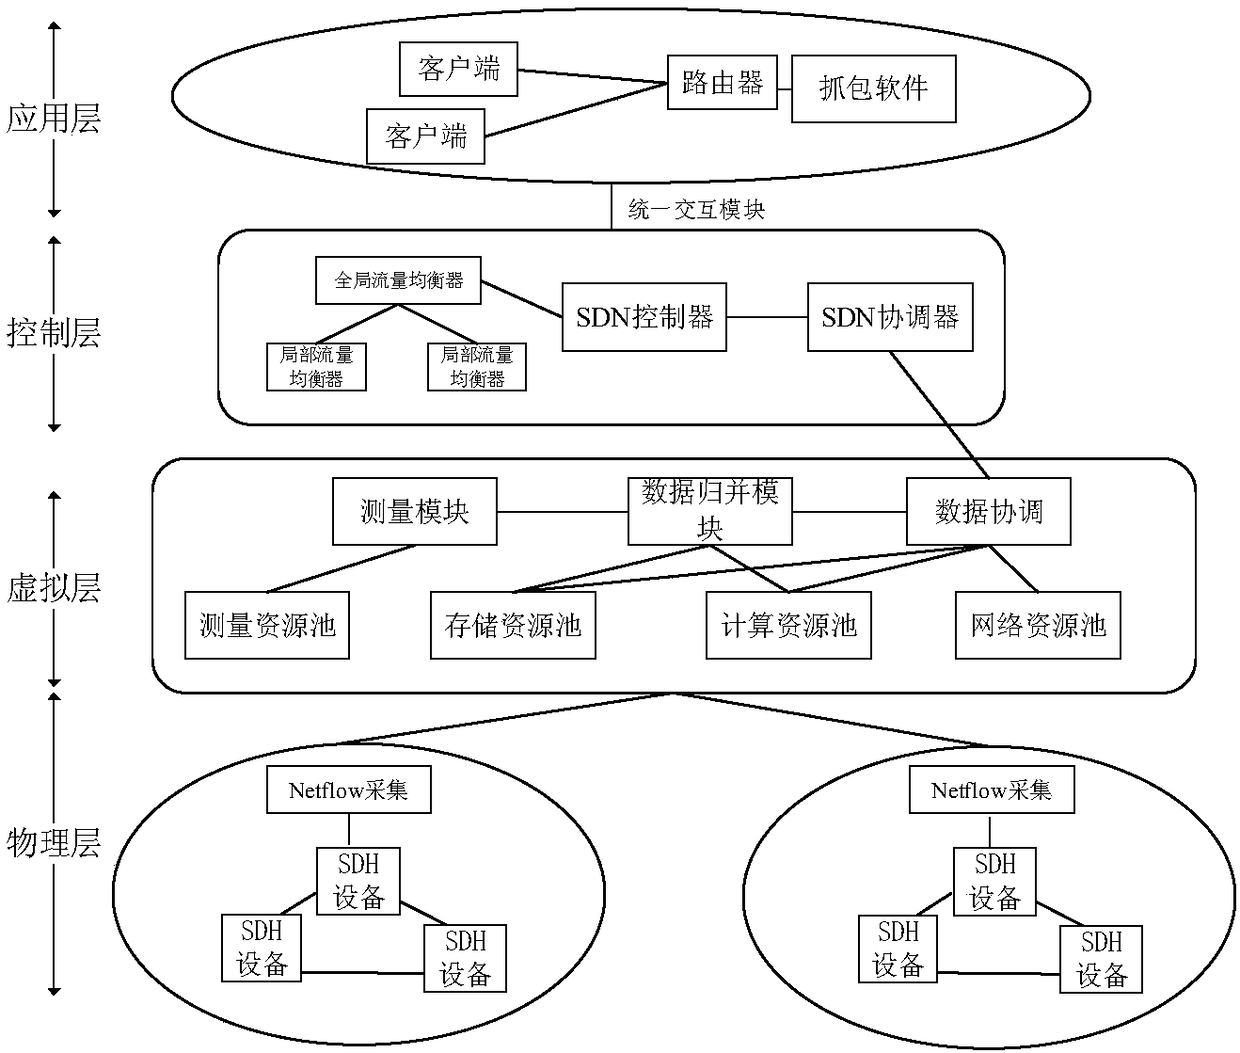 Multi-dimensional power communication network flow prediction method and system